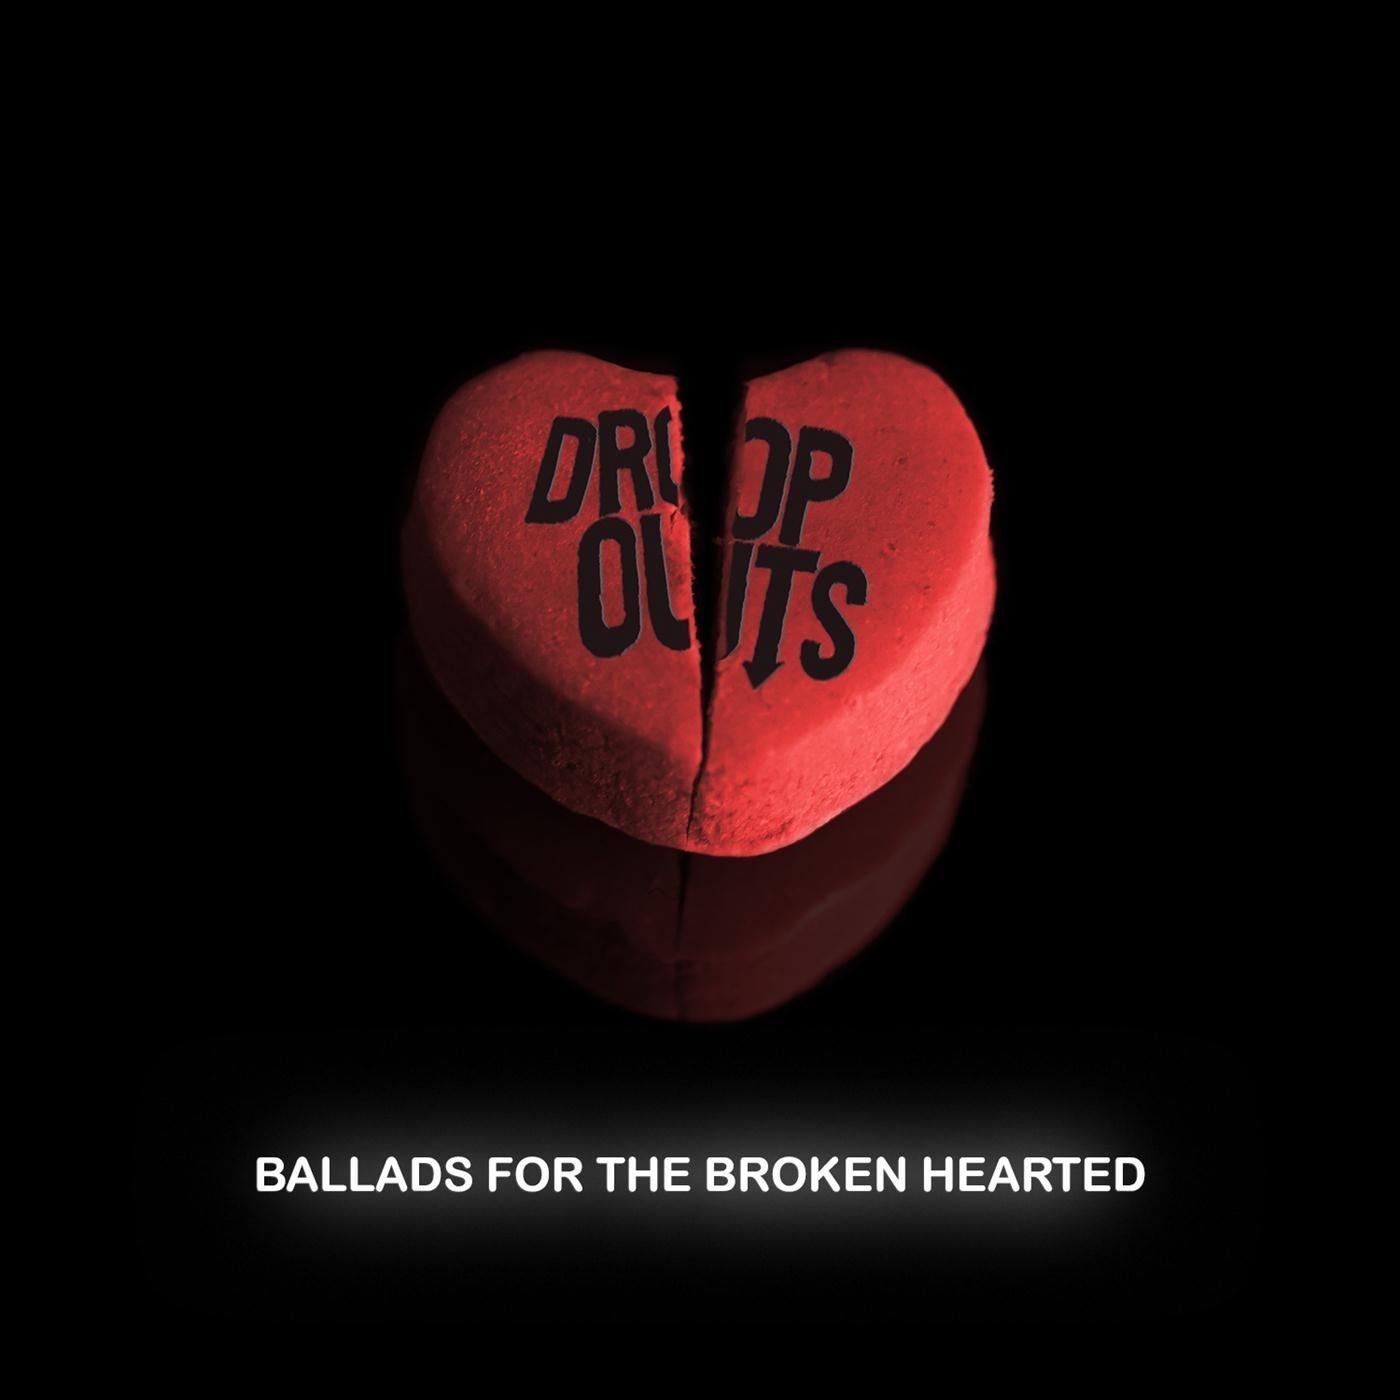 Ballads for the Broken Hearted